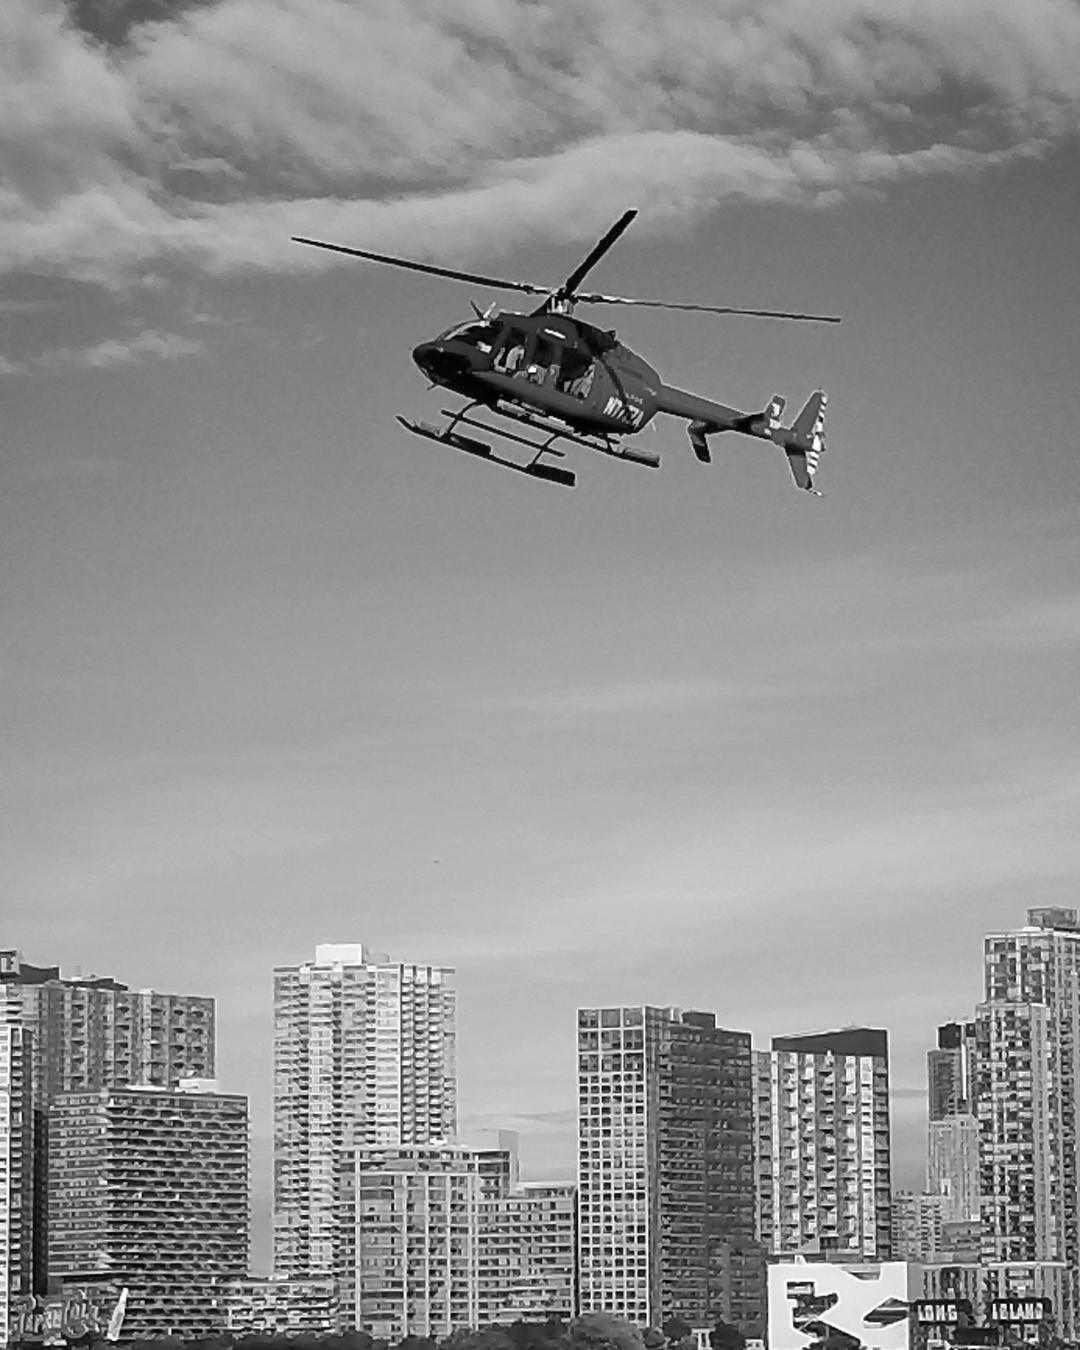 Helicopter flight capturing the contrast between ancient and modern Istanbul architecture.